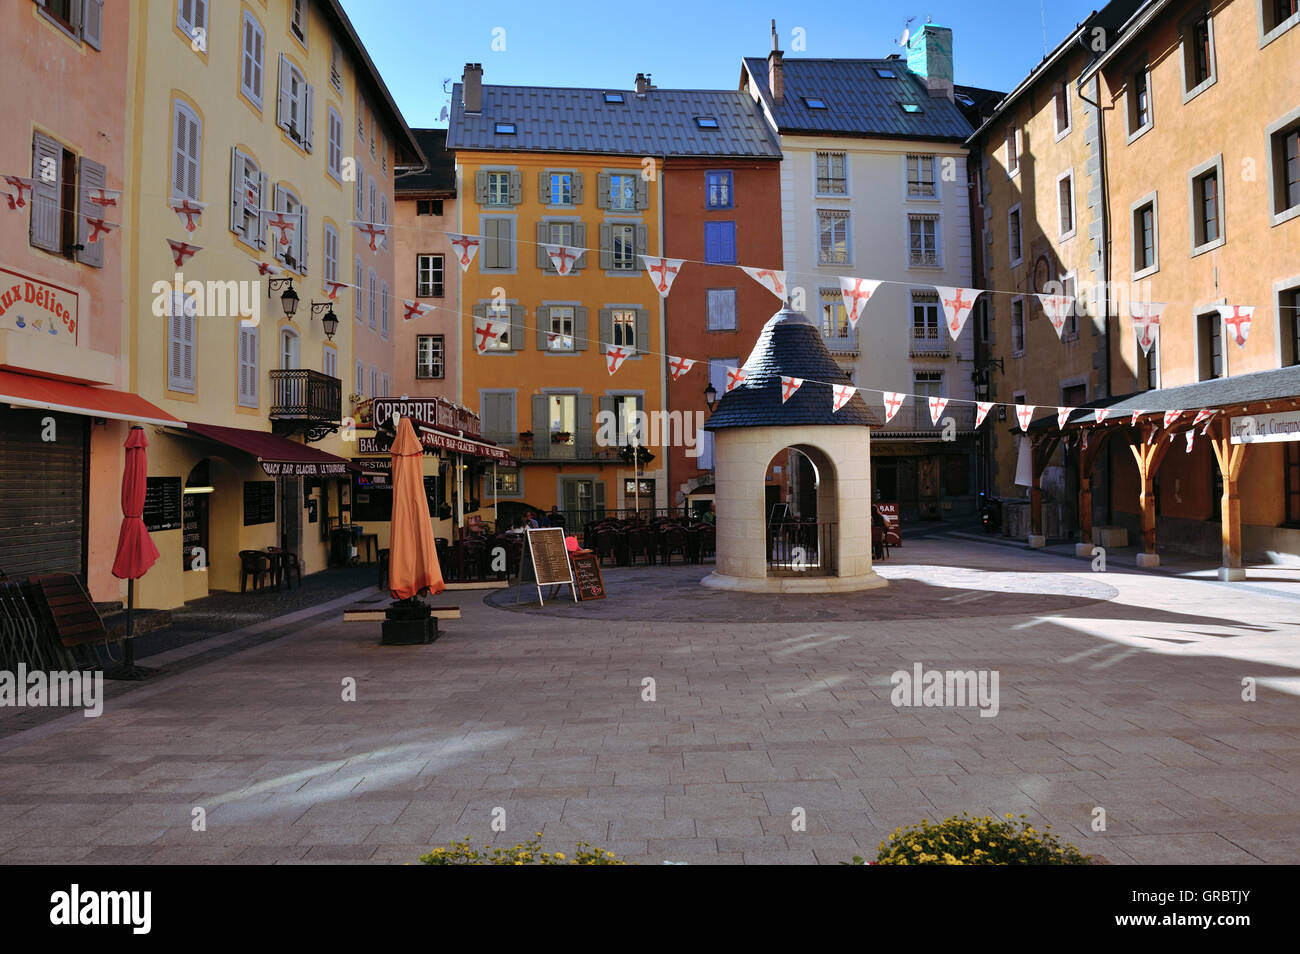 Square In Briancon, Historic Town In The Mountains, Highest Town Of Europe, French Alps, France Stock Photo